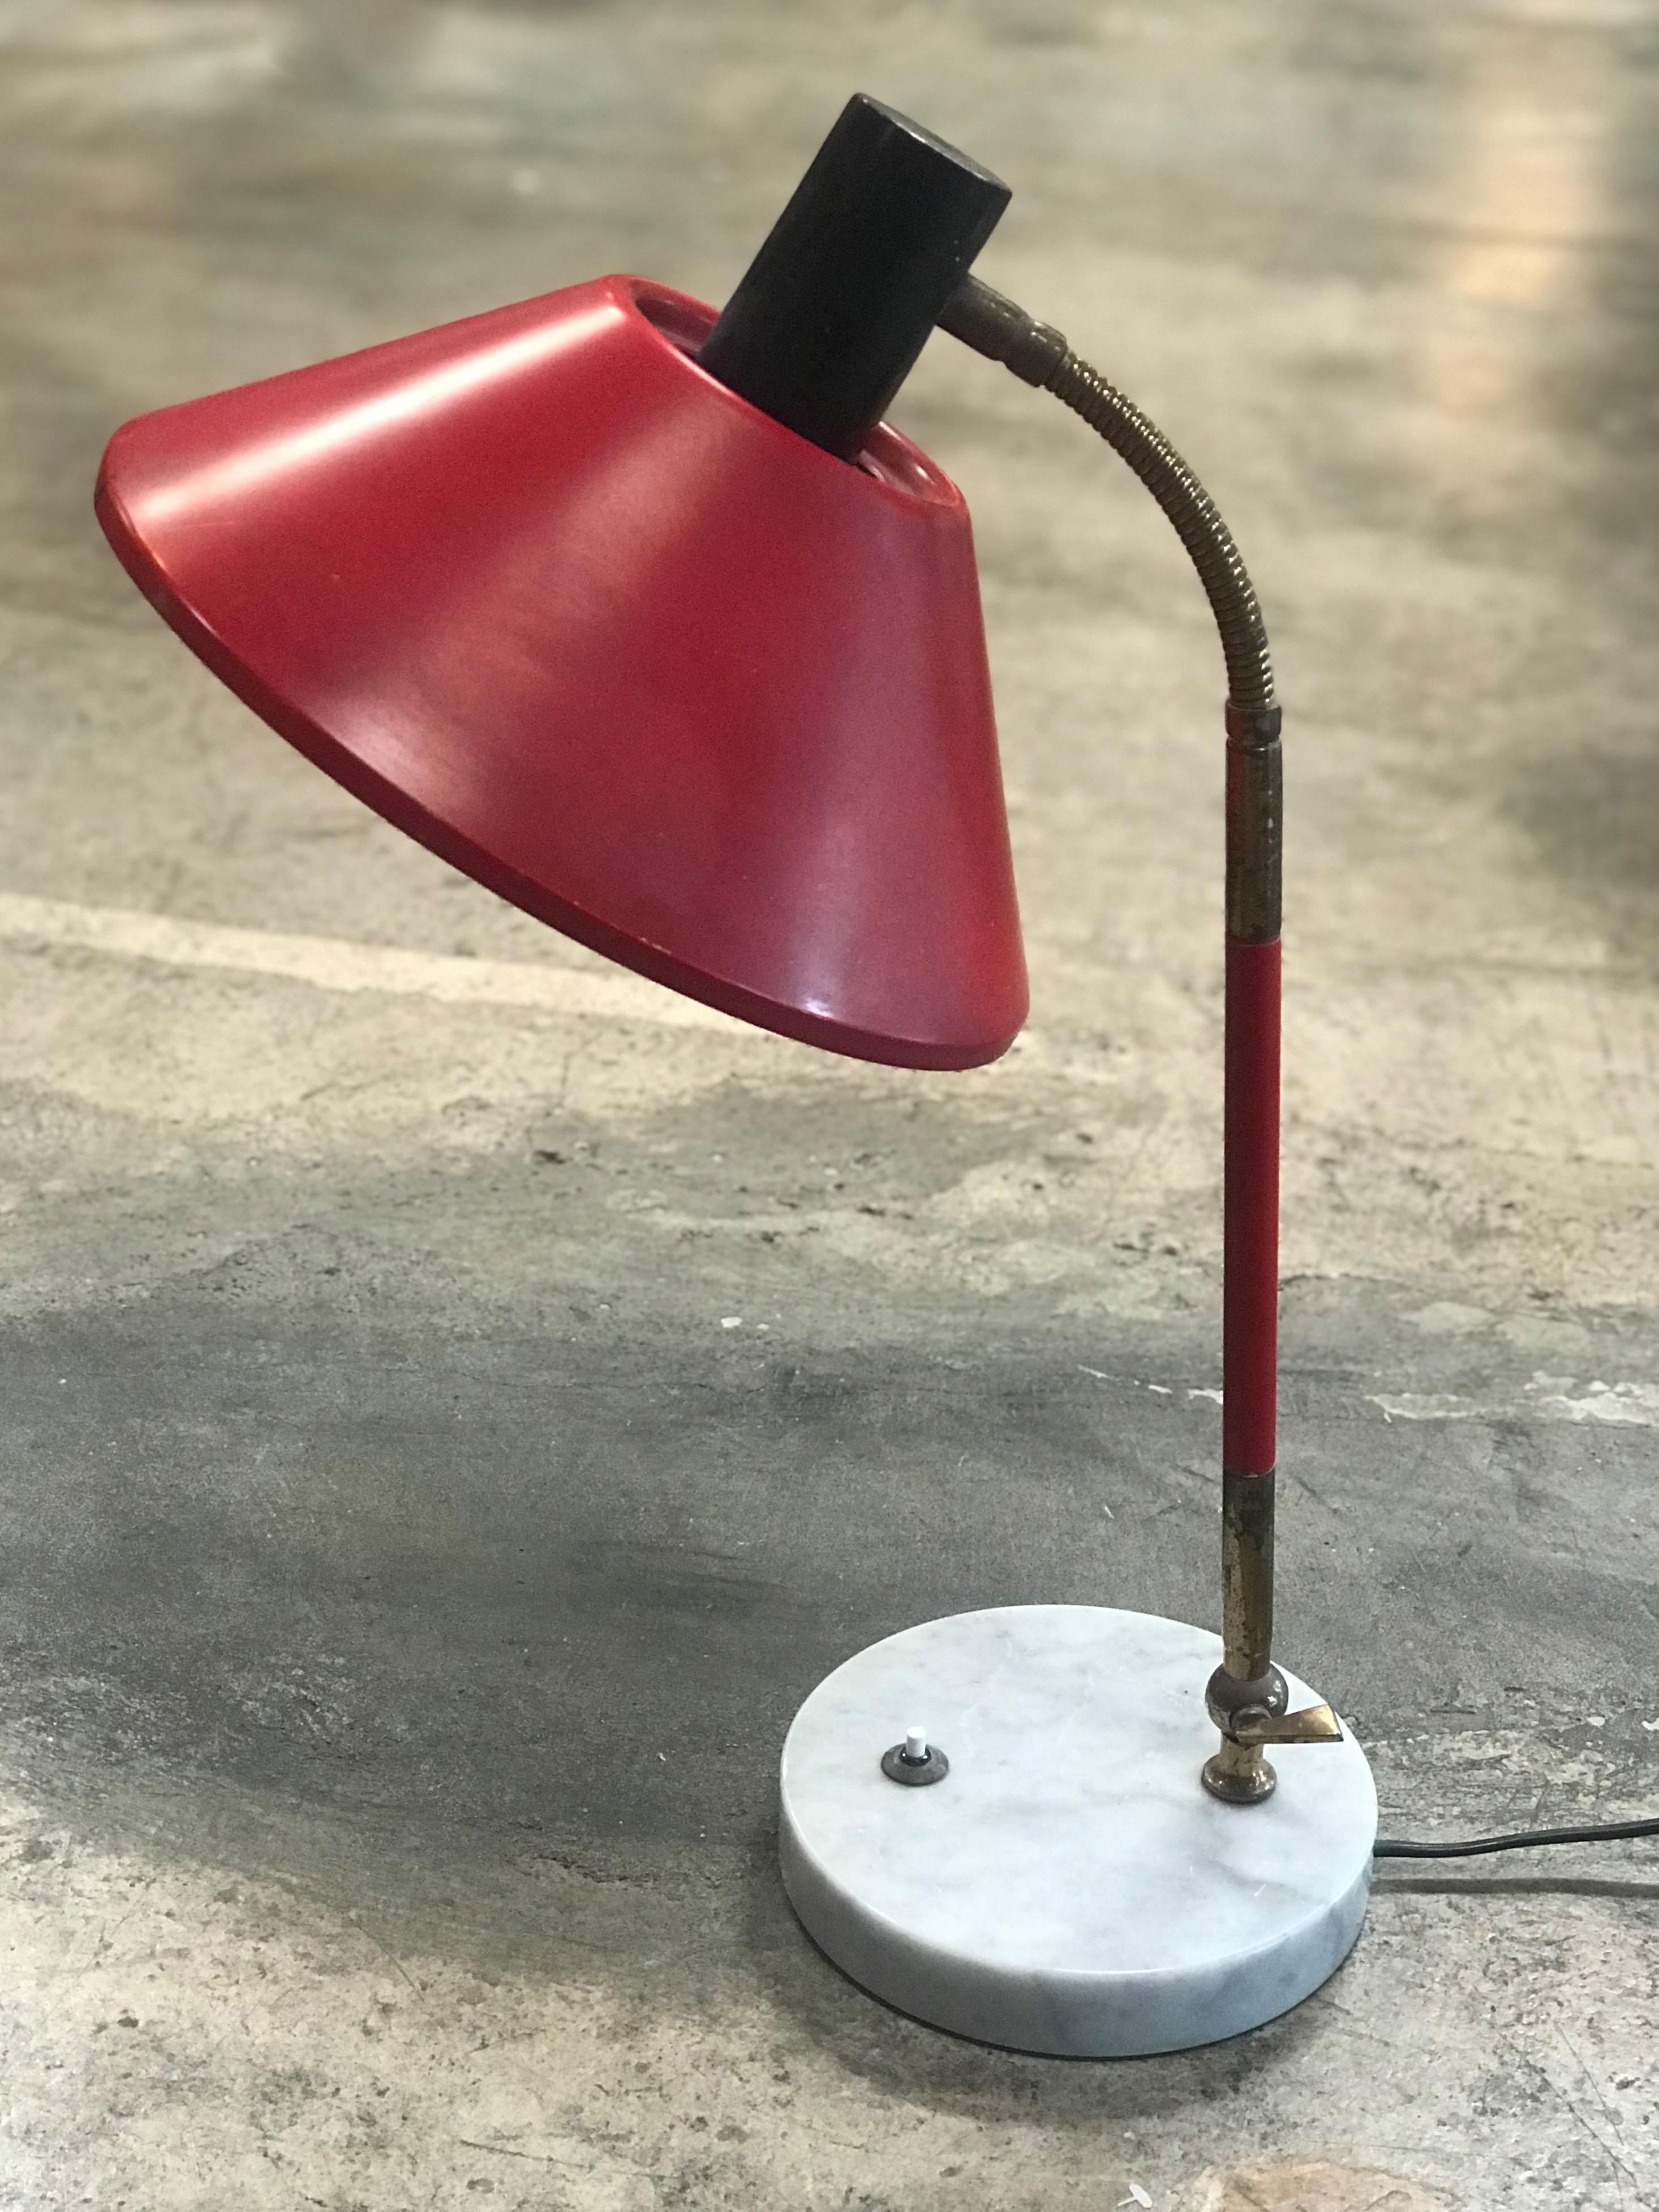 Stilux desk lamp, marble, metal red lacquered, brass, Italy, 1950s.

Stylish desk light with mirrored shade. The circular shade matched the brass stem and the marble base perfectly. The base is a white marble circle (Diam. 7